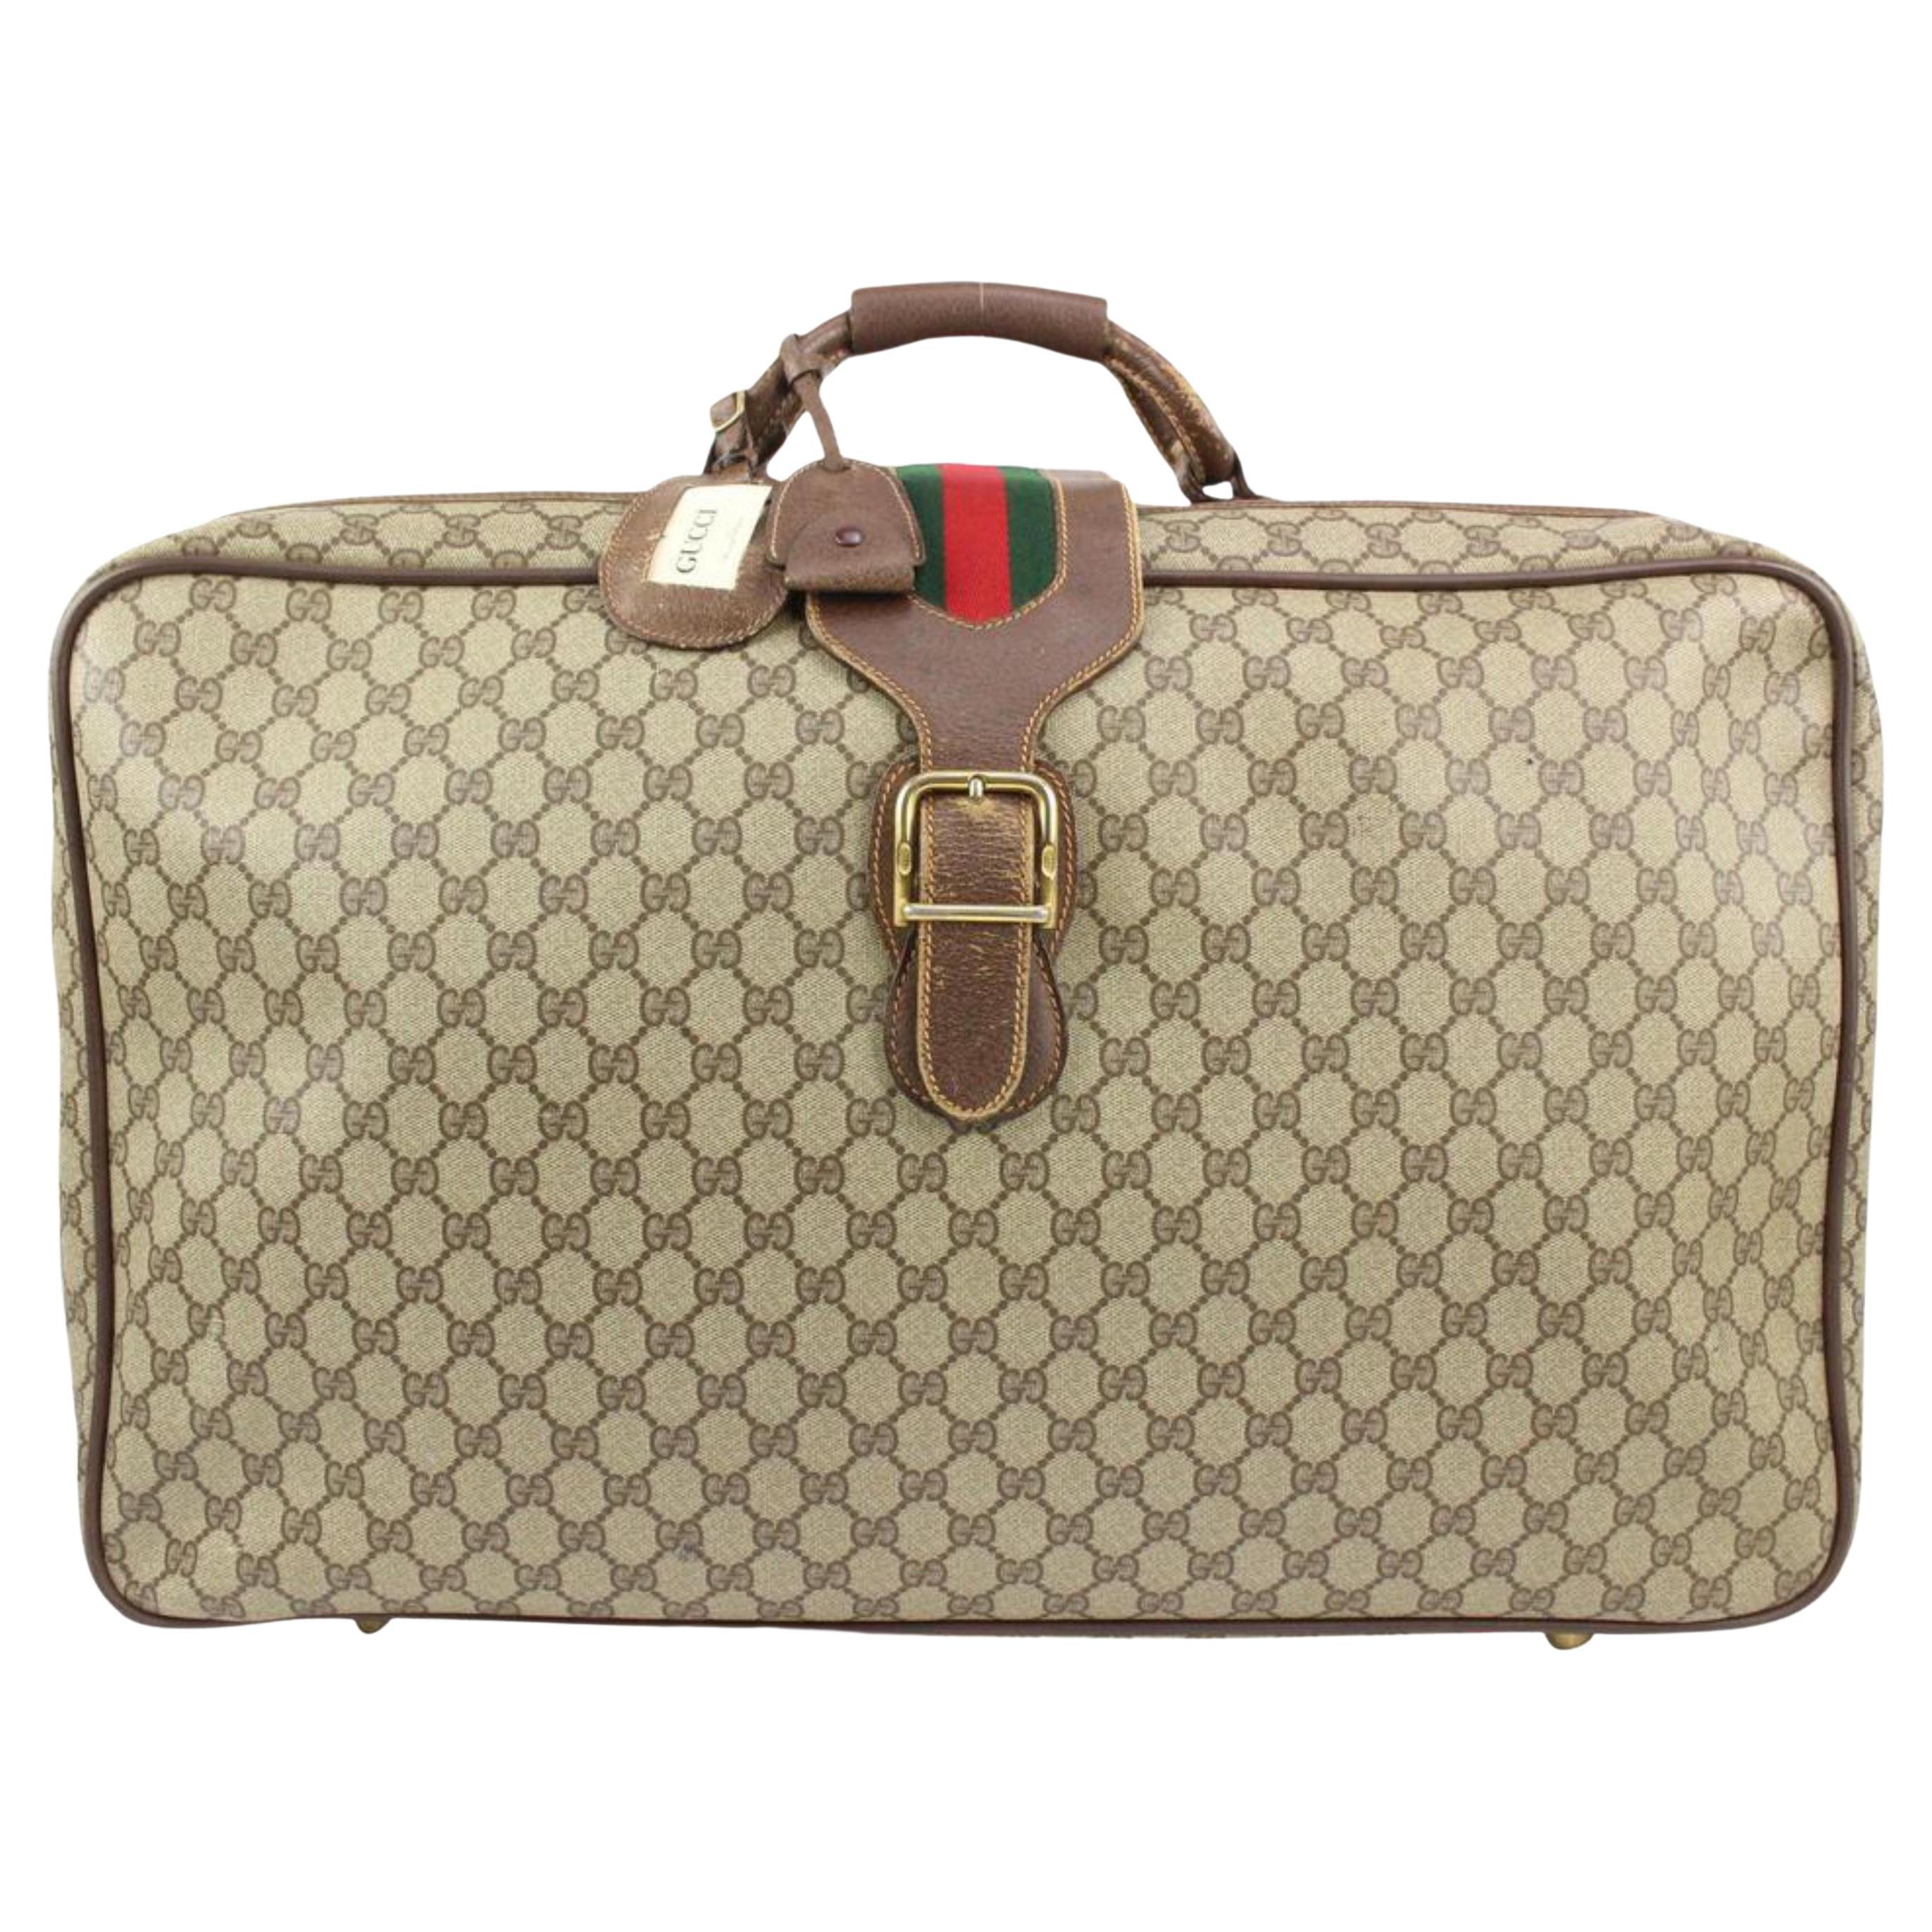 Gucci Ultra Rare XL Web Garment Cover Travel Bag Suitcase Leather